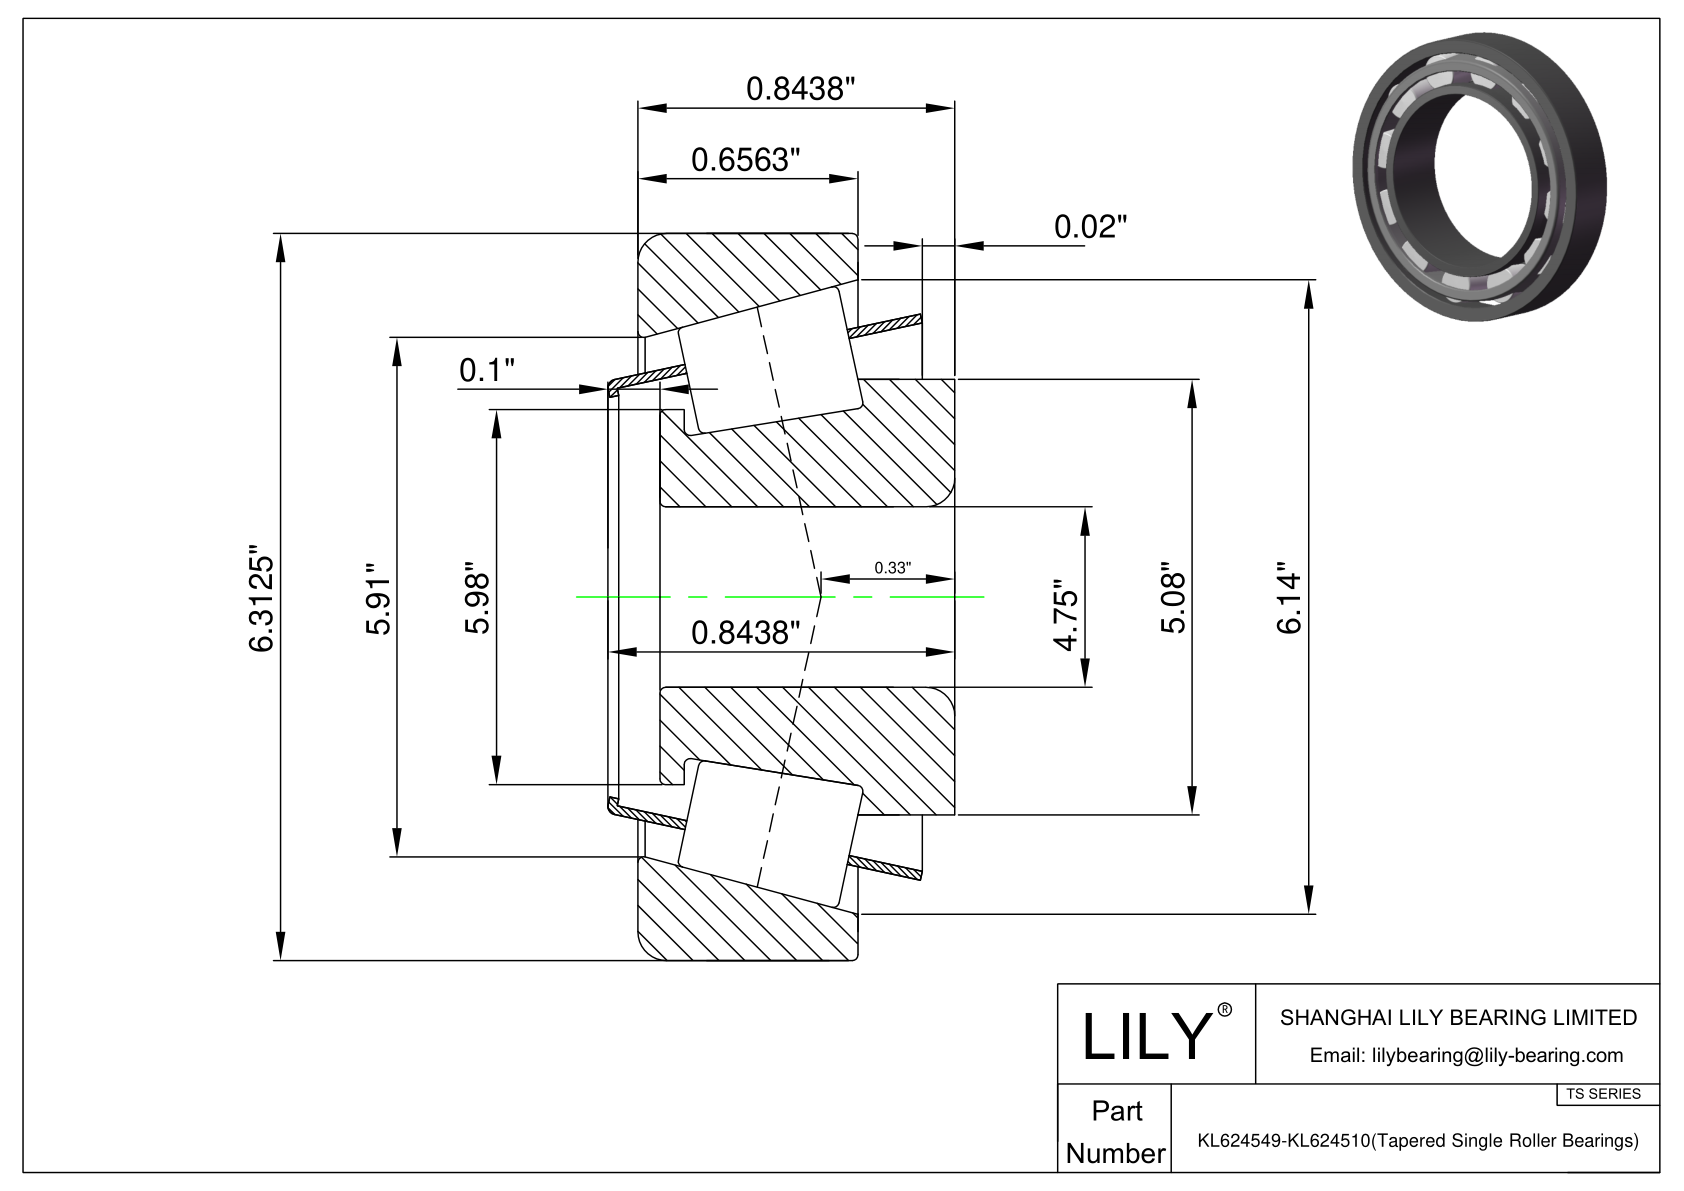 KL624549-KL624510 TS (Tapered Single Roller Bearings) (Imperial) cad drawing